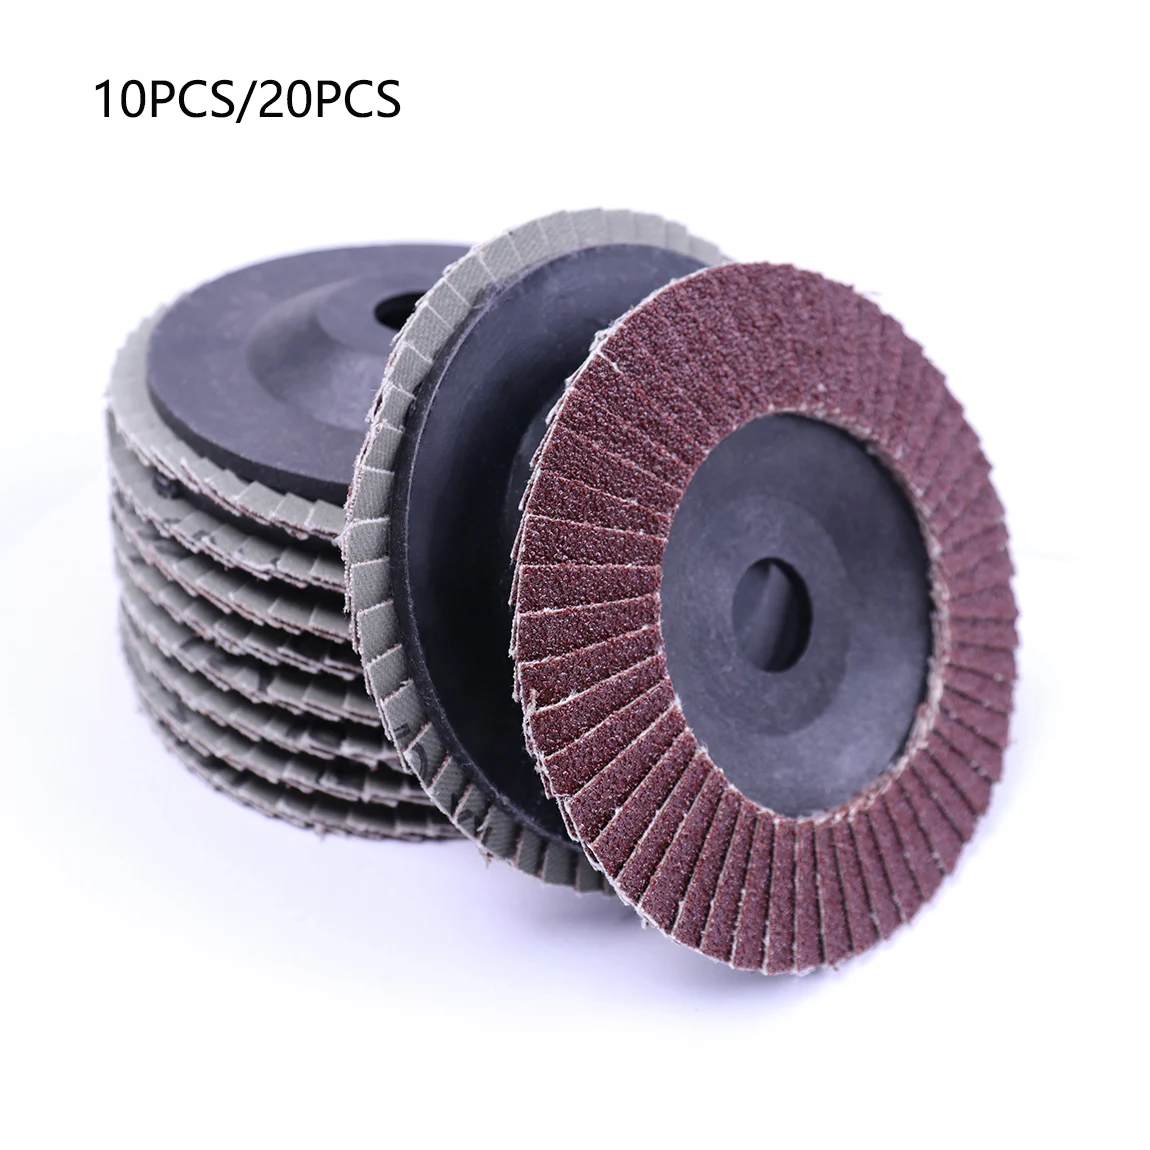 CHEERBRIGHT 10/20pcs Sanding Discs 80 Grit Grinding Wheel Blade for 100mm Angle Grinder Abrasive Tool Sanding Disc engraver abrasive tools accessories sanding grinding polishing engraving tool head for dremel grinder rotary tools sanding discs